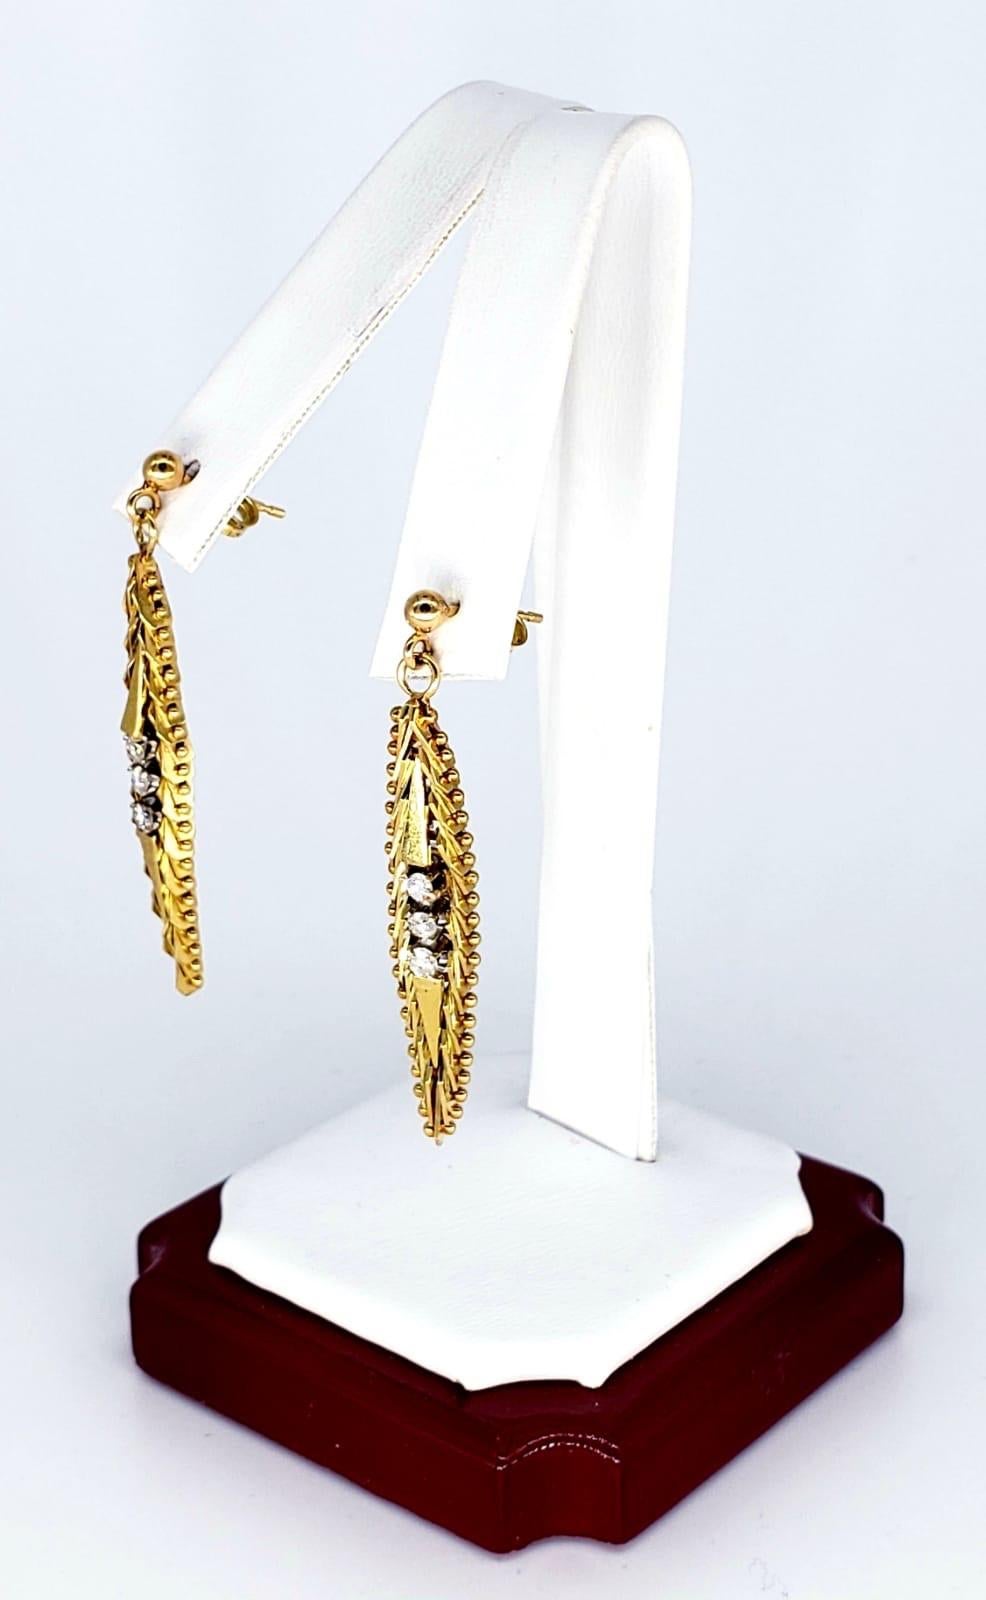 Vintage 0.24 Carats Drop Earrings 14k Gold. These earrings are a true masterpiece The way they were designed and made. The earrings feature both yellow gold & white gold. These earrings stand out in the crowd and have a bright dangling shine to them